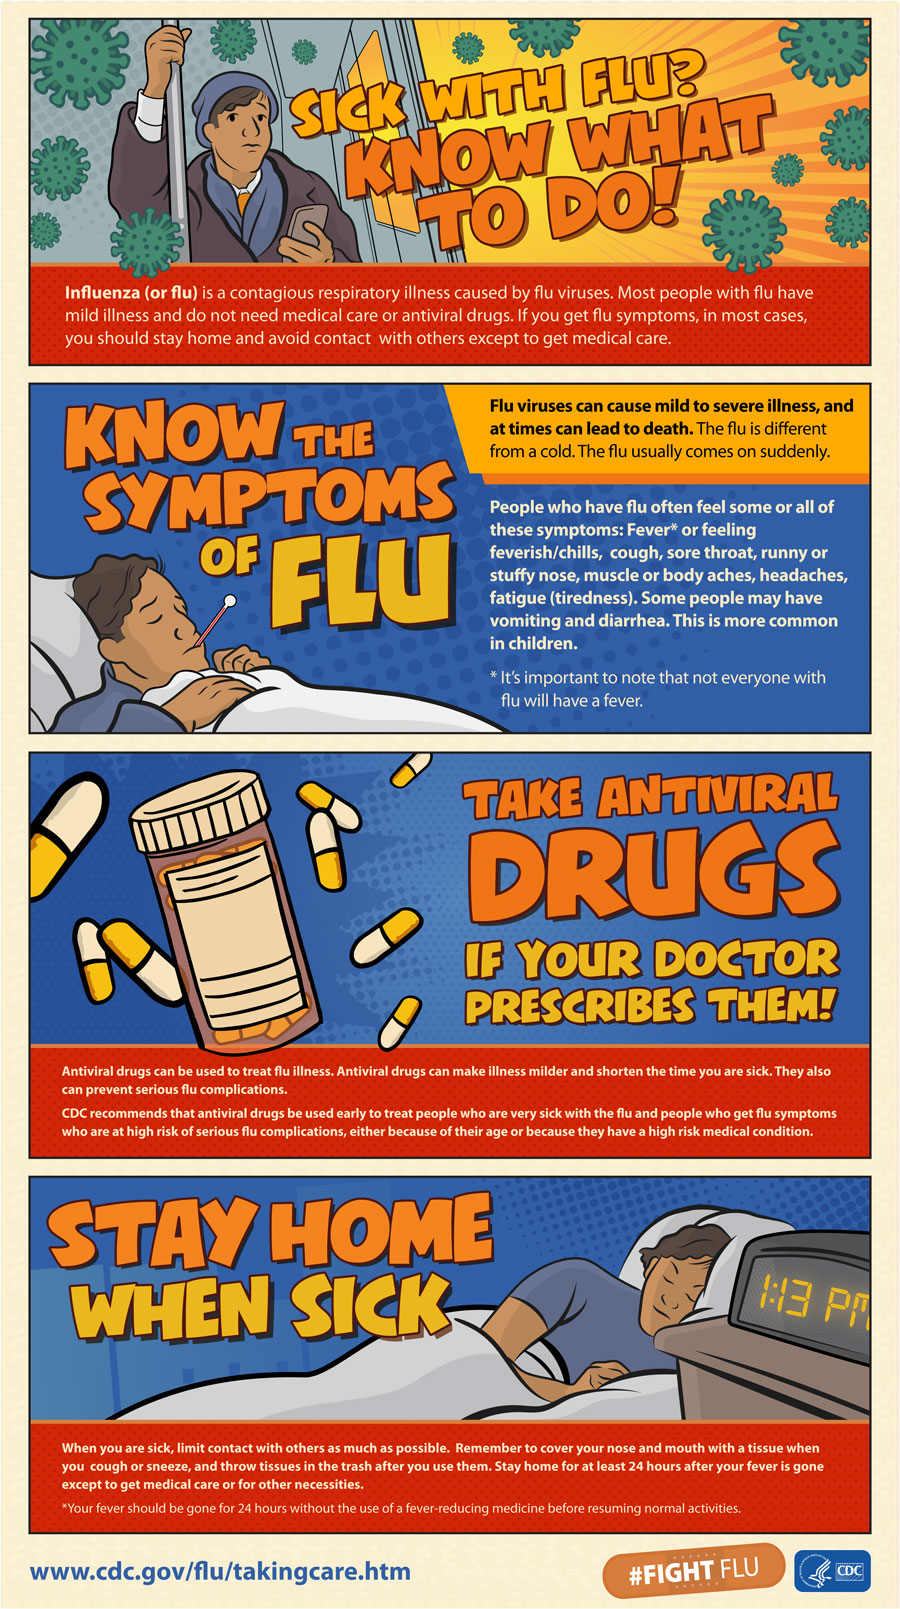 Sick with the flu? Know what to do!